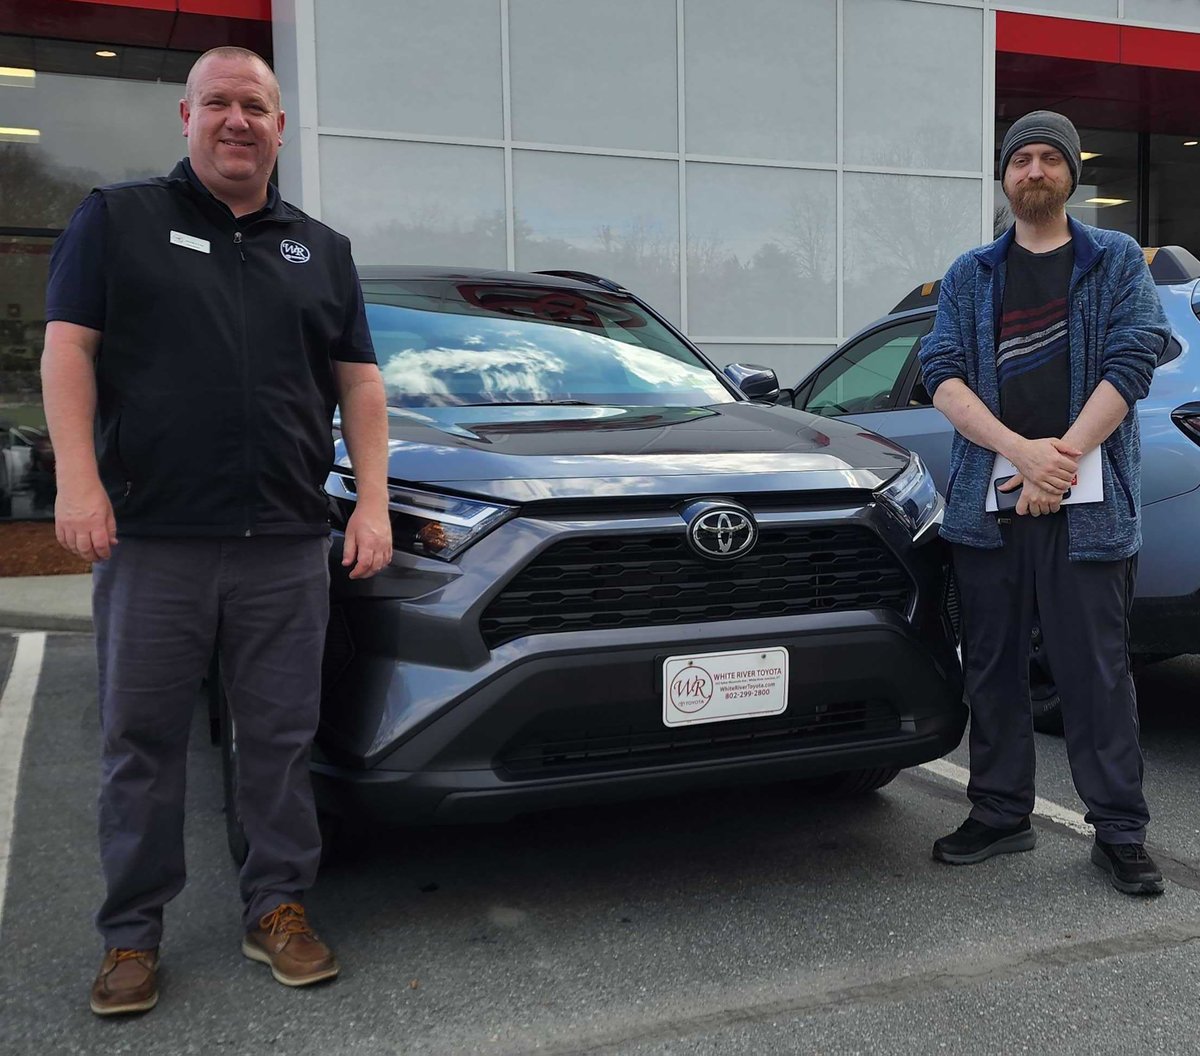 Happy #NewCarDay to Matthew! He became the proud owner of this awesome new @Toyota RAV4 XLE, thanks to some help from Justin Smith - Congrats!

Learn more about Justin & check out his reviews on @DealerRater: bit.ly/3O9Zor2

#Toyota #LetsGoPlaces #RAV4